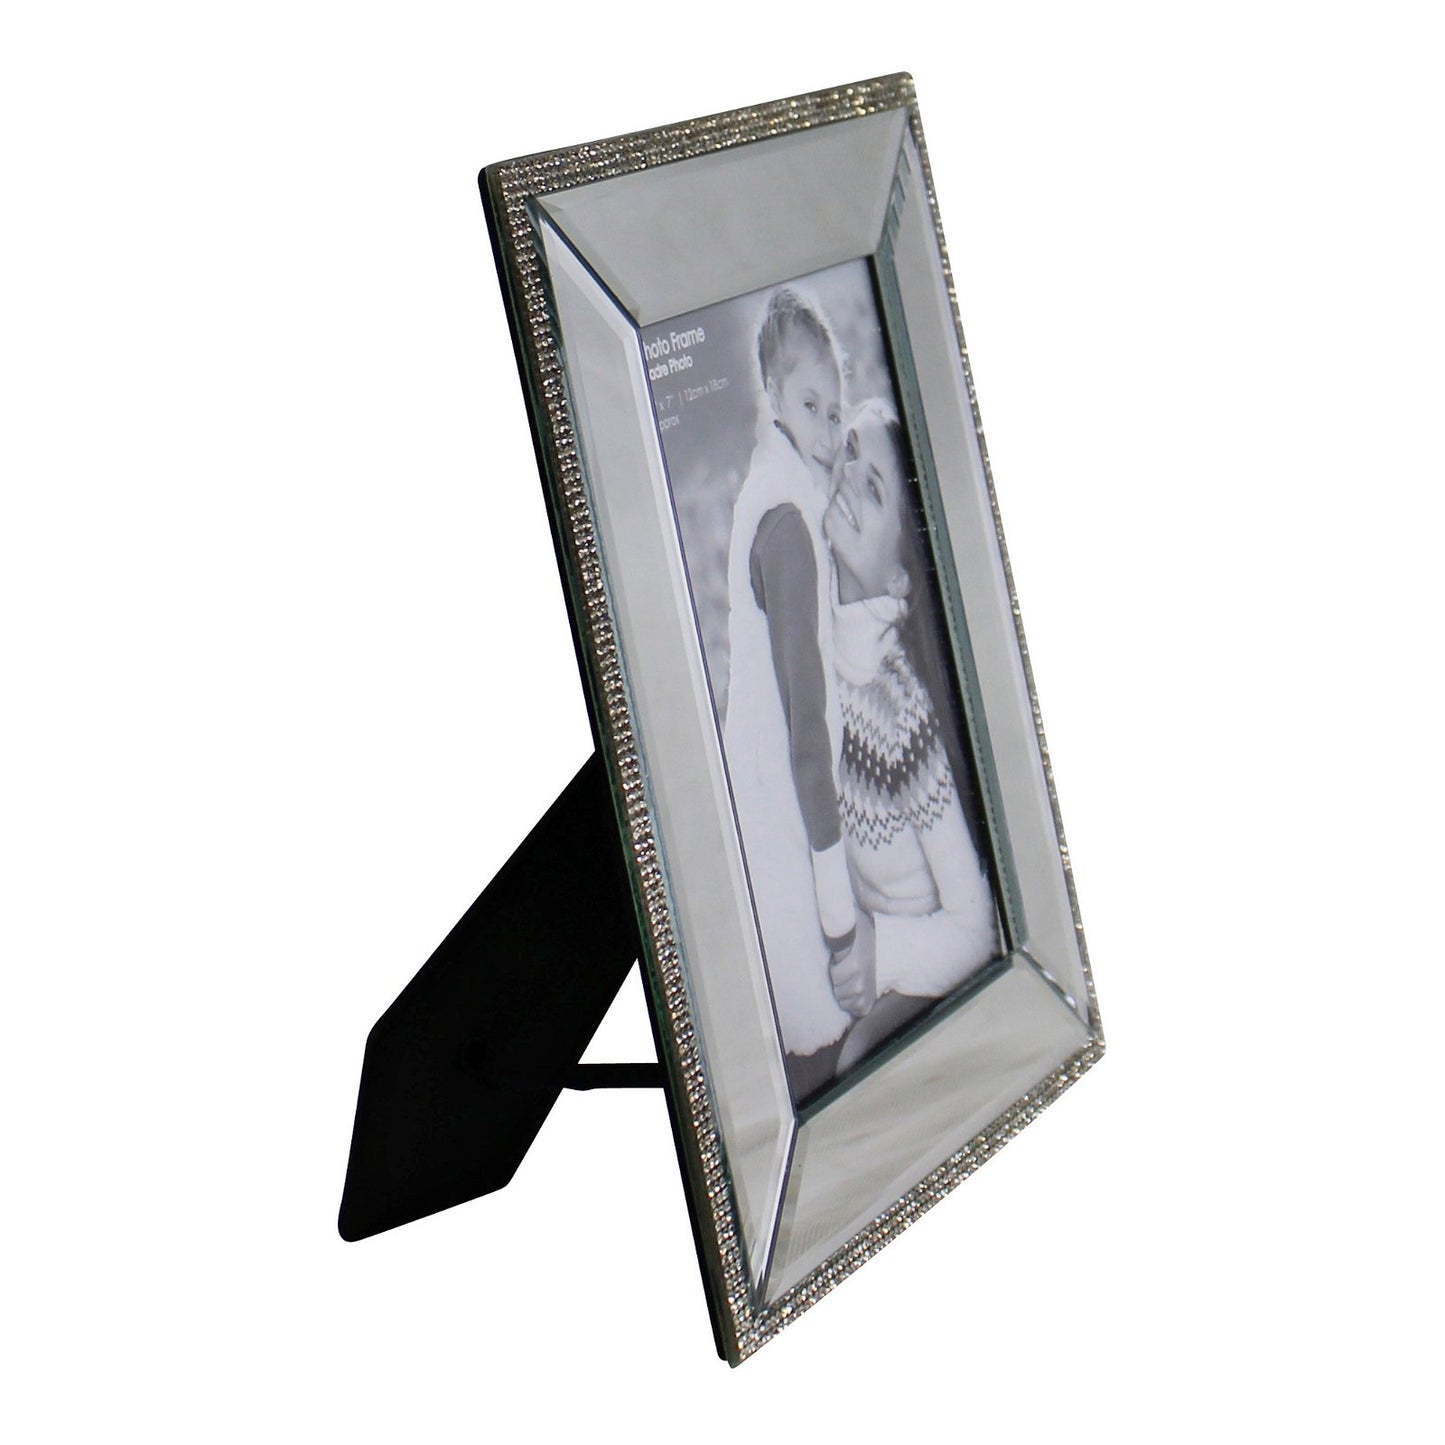 Mirrored Freestanding Photo Frame (5x7in) With Crystal Detailing